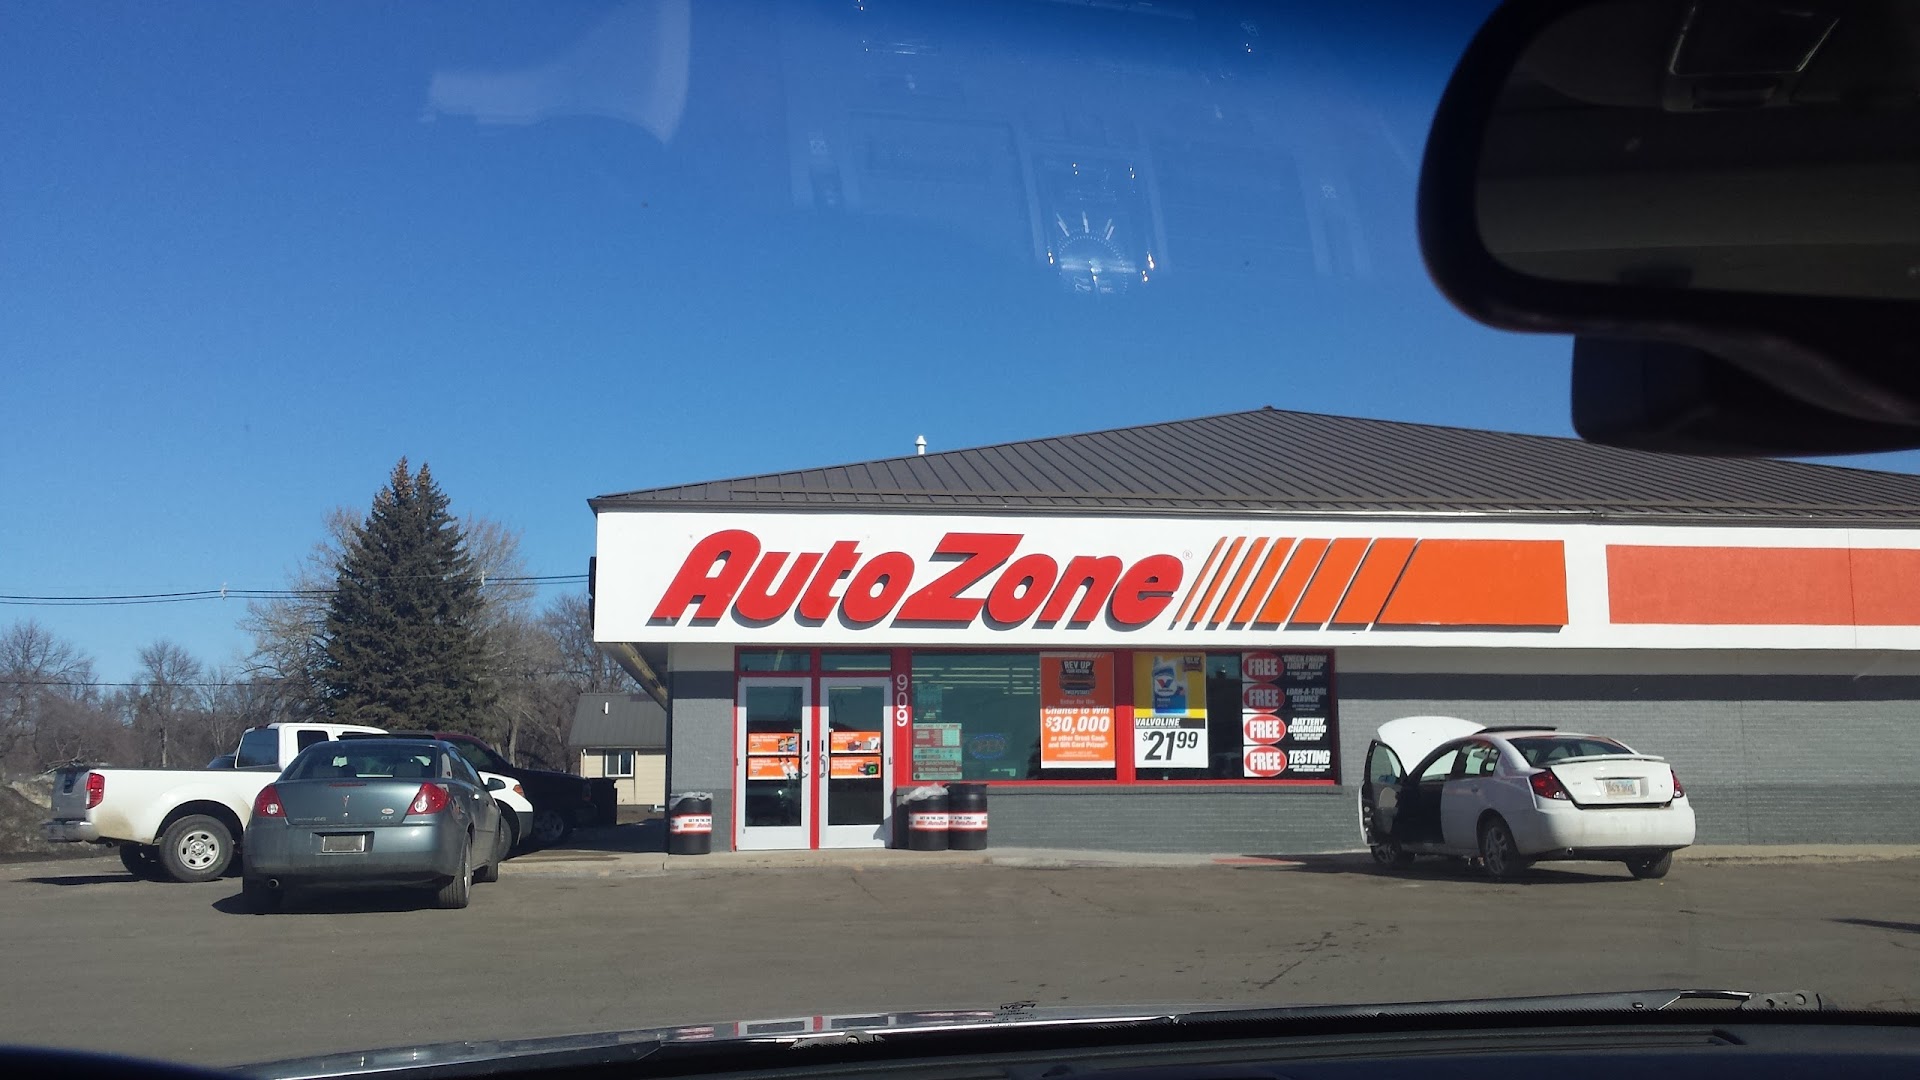 Auto parts store In Watertown SD 